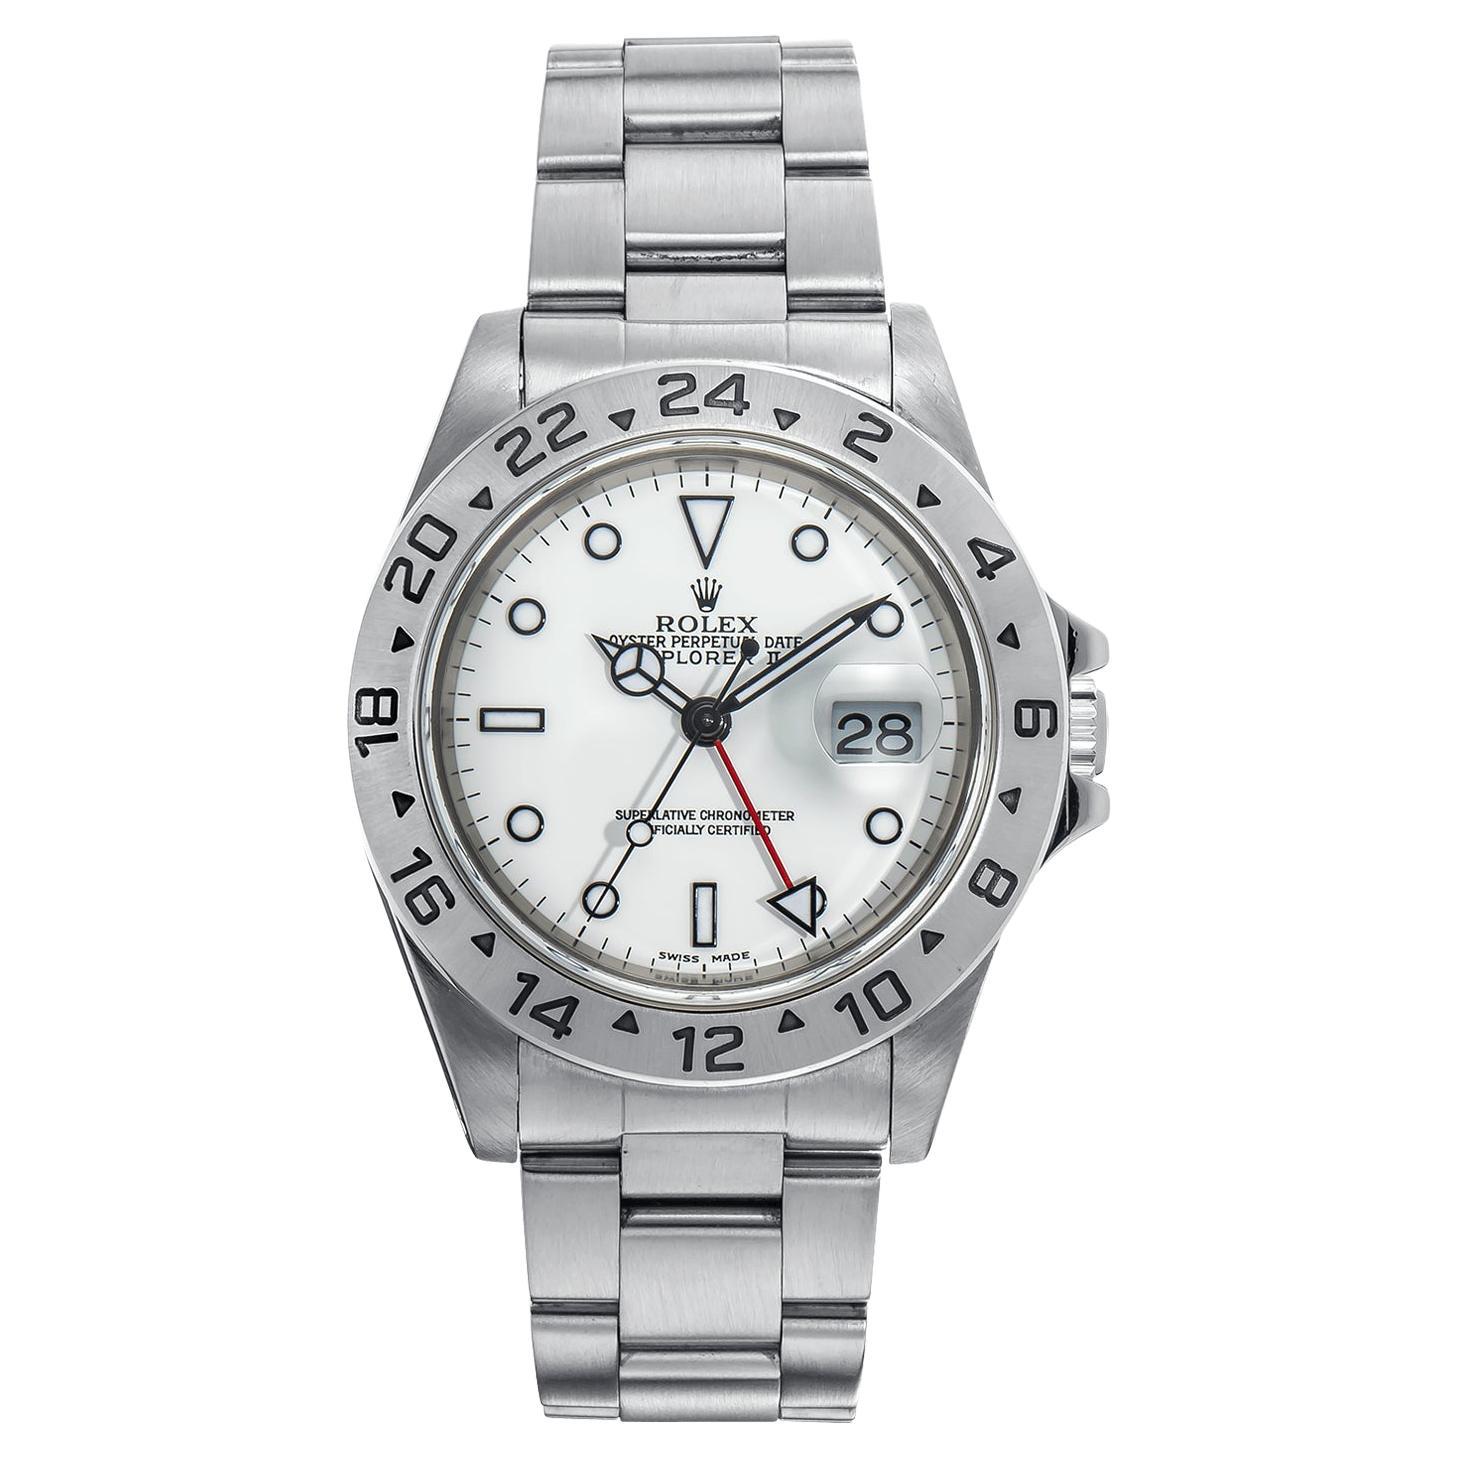 Is the Rolex Explorer II discontinued?